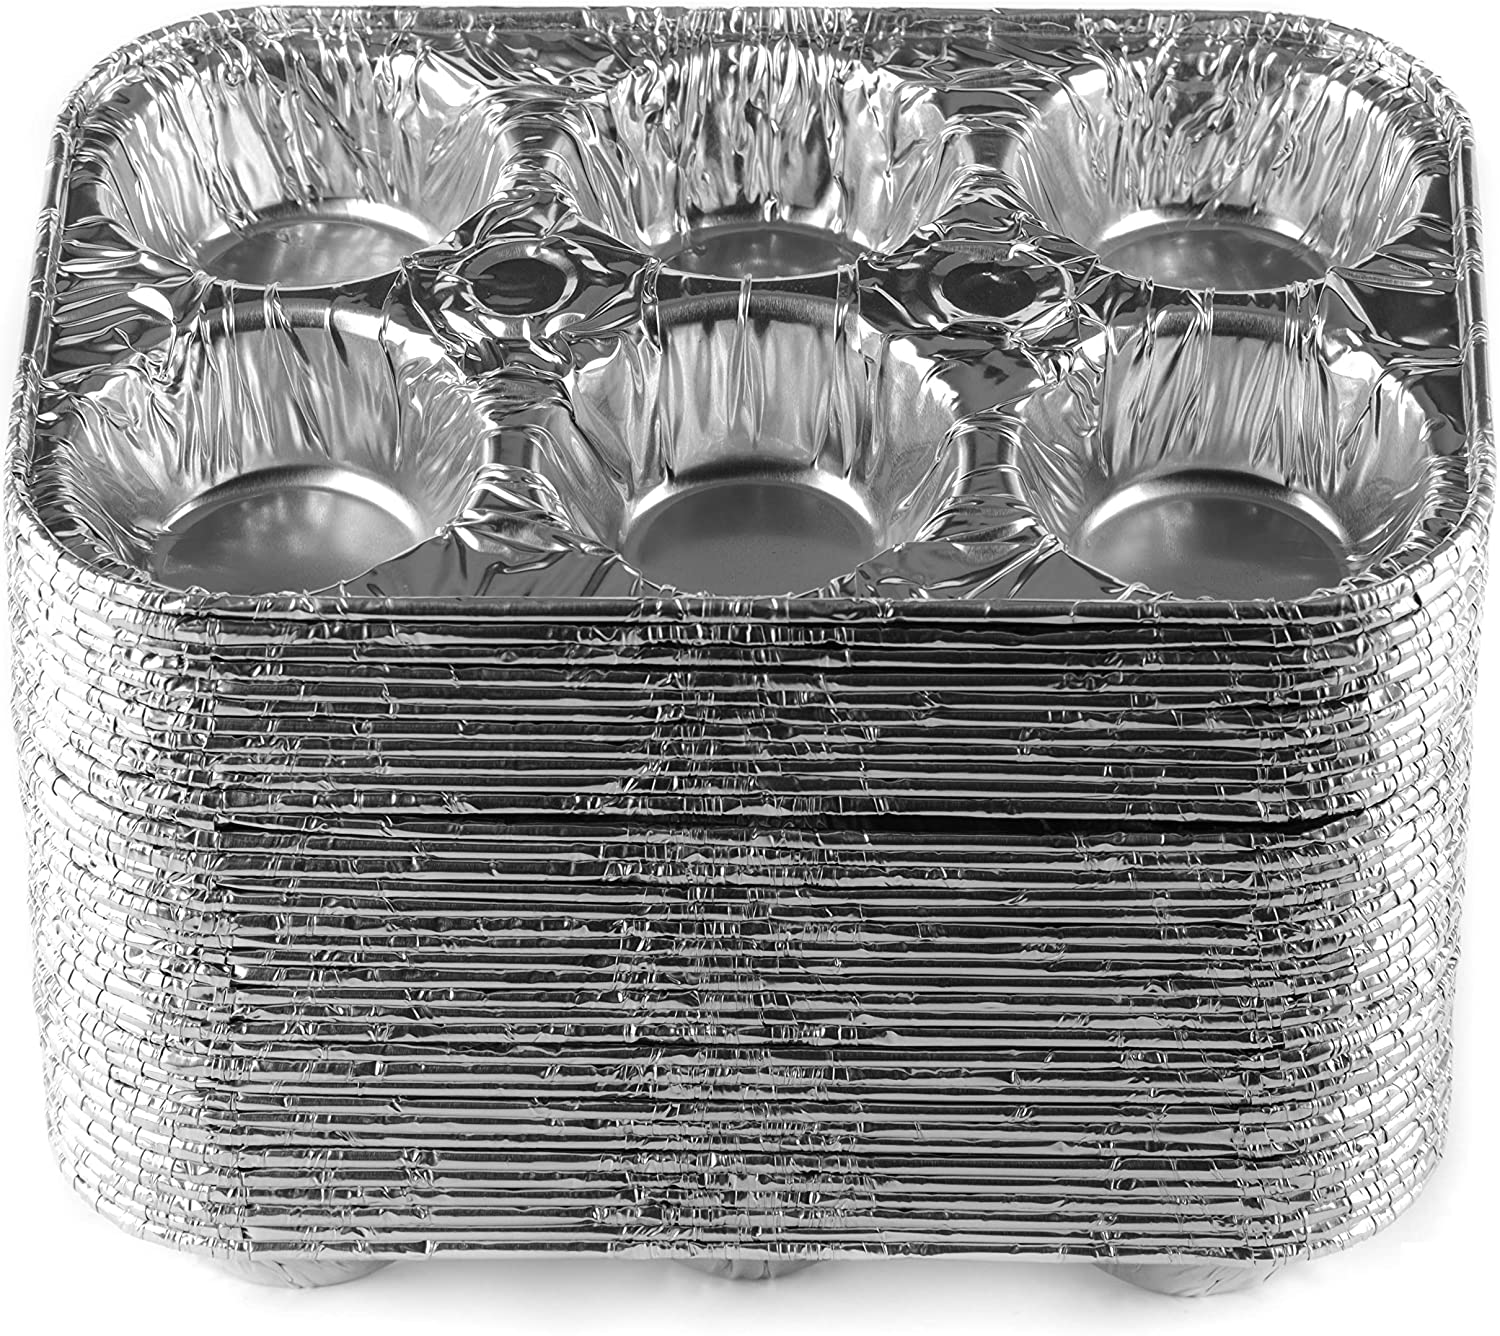 Aluminum 6-Cup Muffin Pan - Disposable Aluminum Cupcake Pans - Reusable, Recyclable - Muffin Tin Great for Baking Cupcakes, Muffins, Small Pies